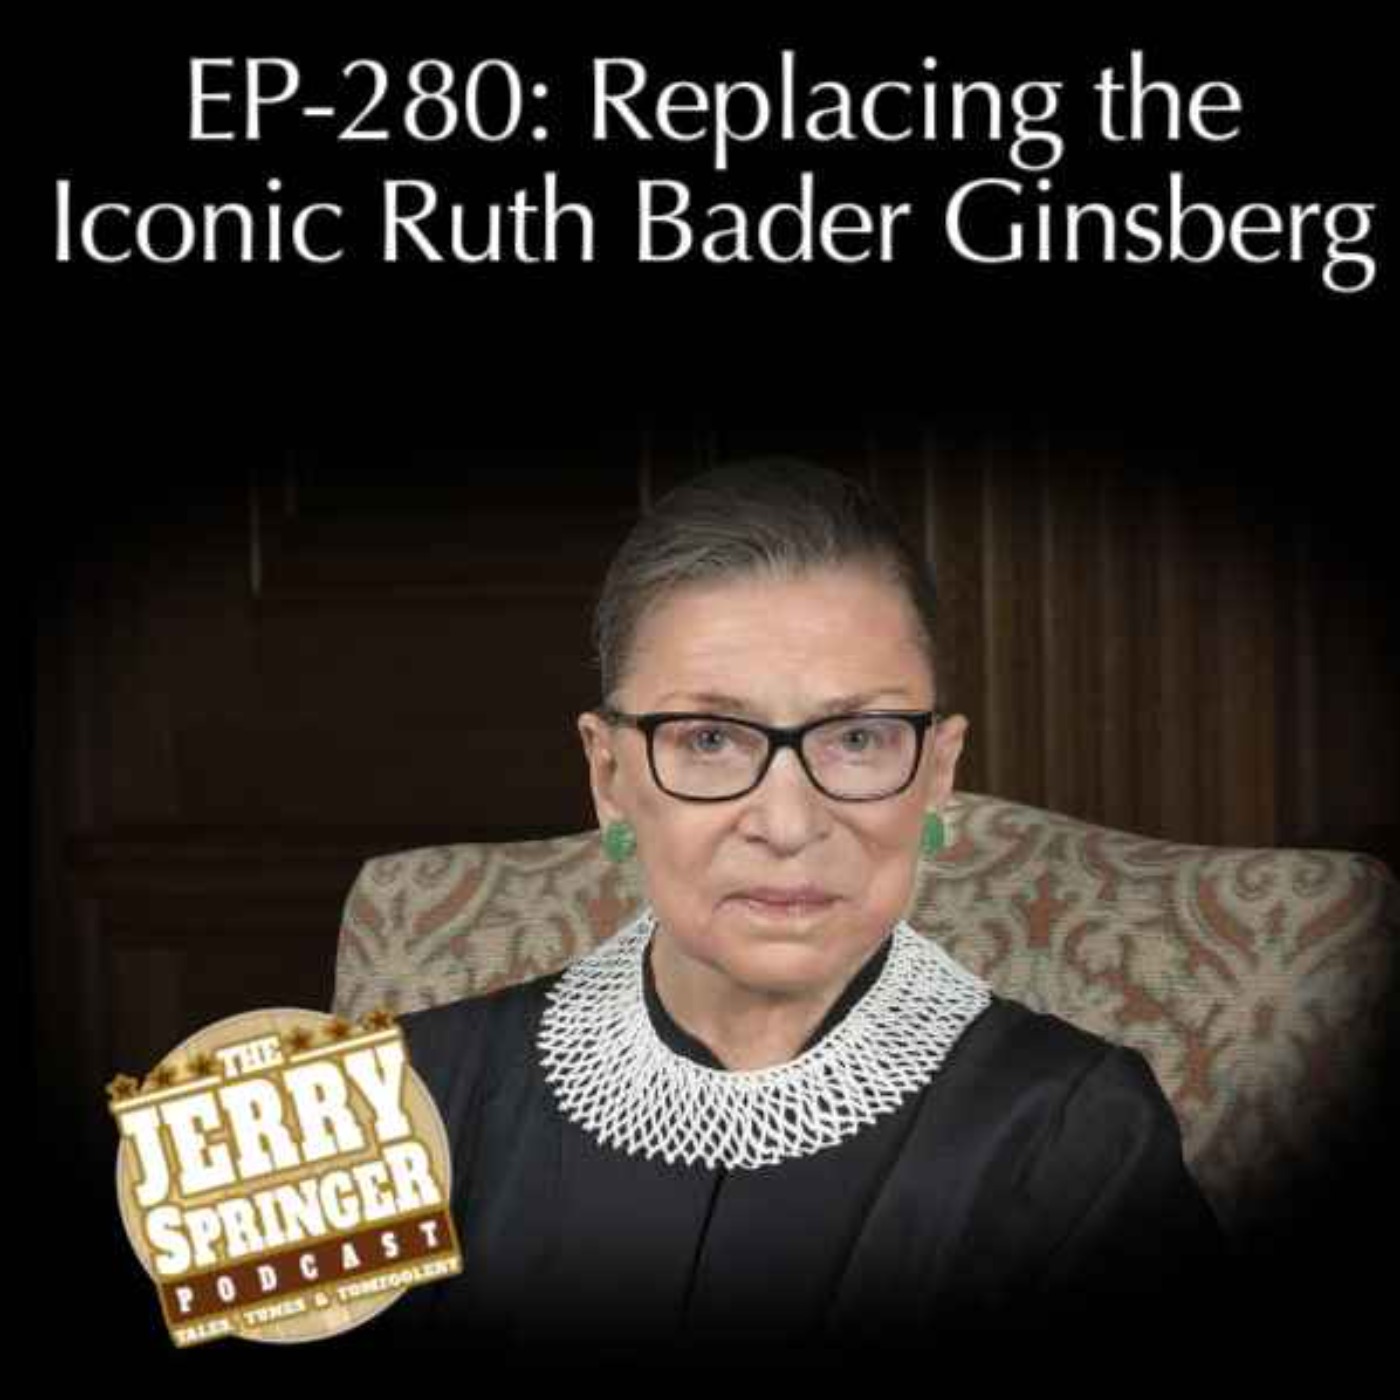 Replacing the Iconic Ruth Bader Ginsberg - EP 280